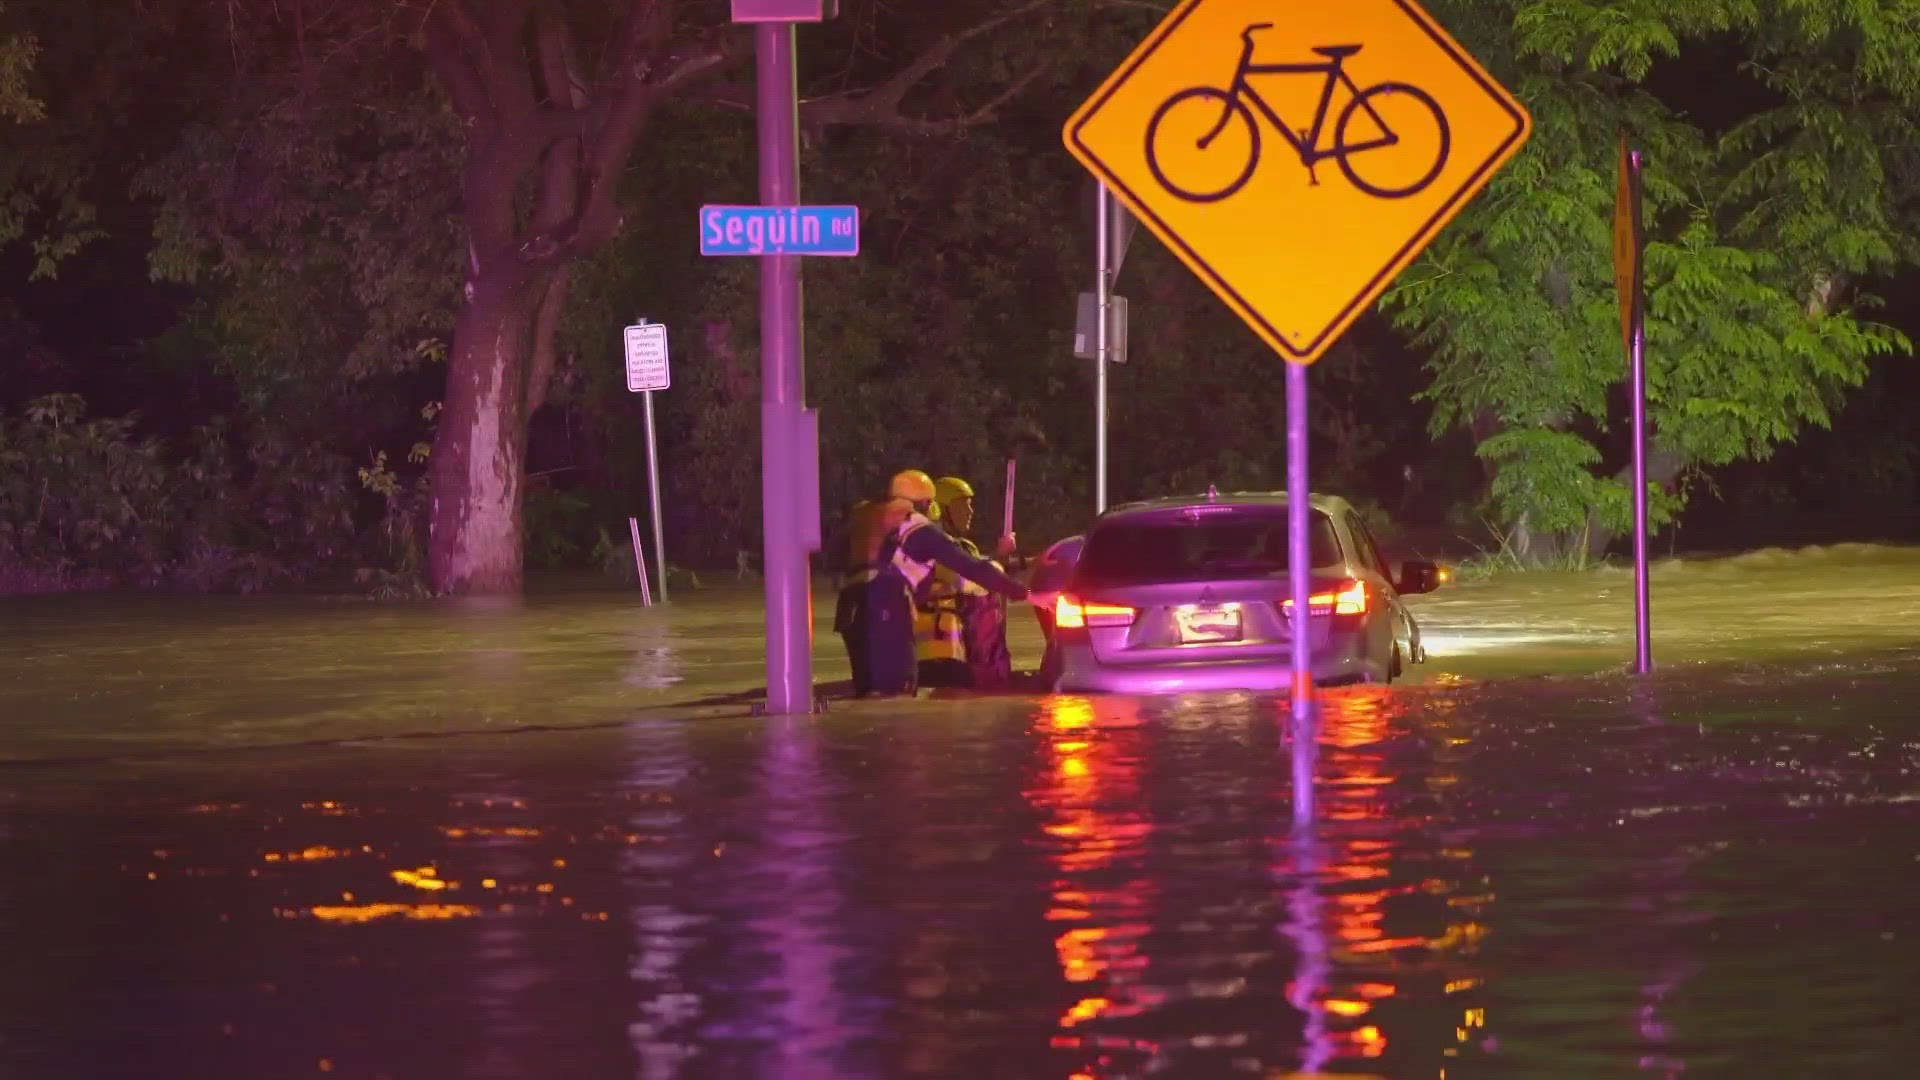 Officials once again remind everyone to "Turn Around, Don't Drown!"